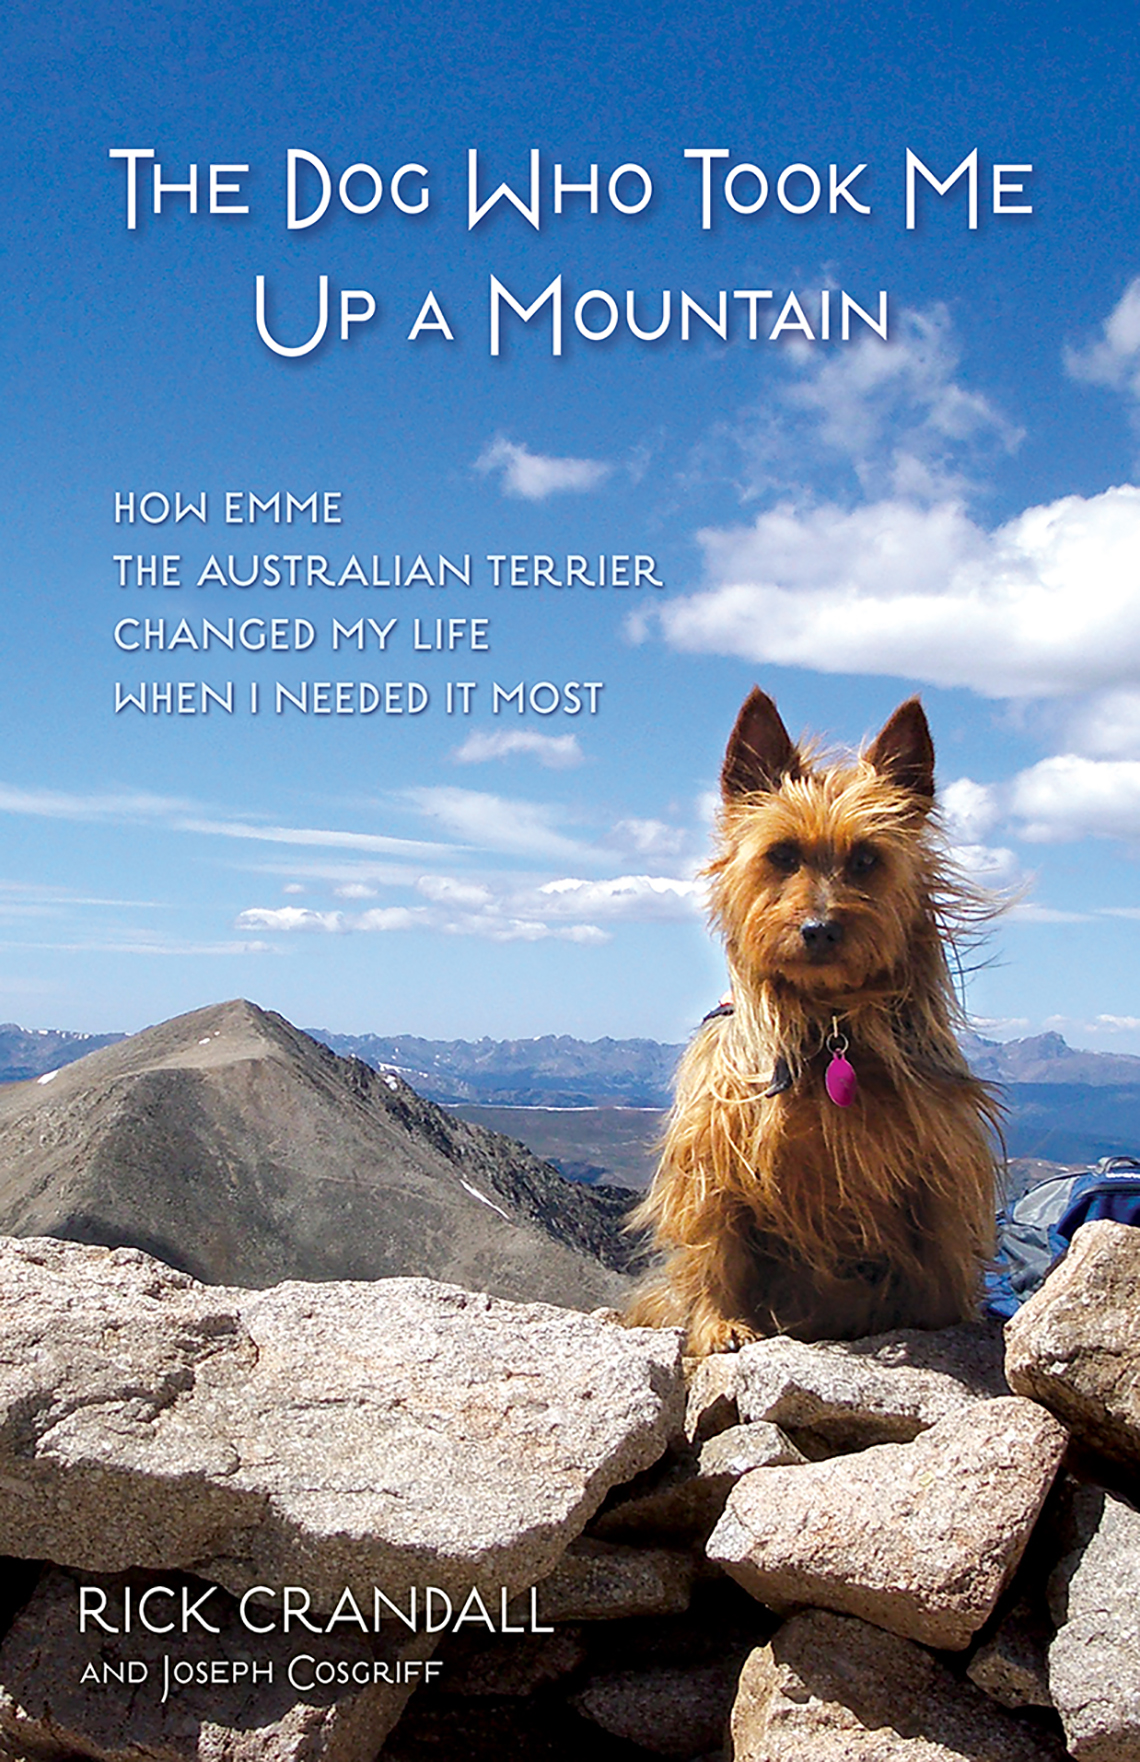 The book cover for 'The Dog Who Took Me Up a Mountain